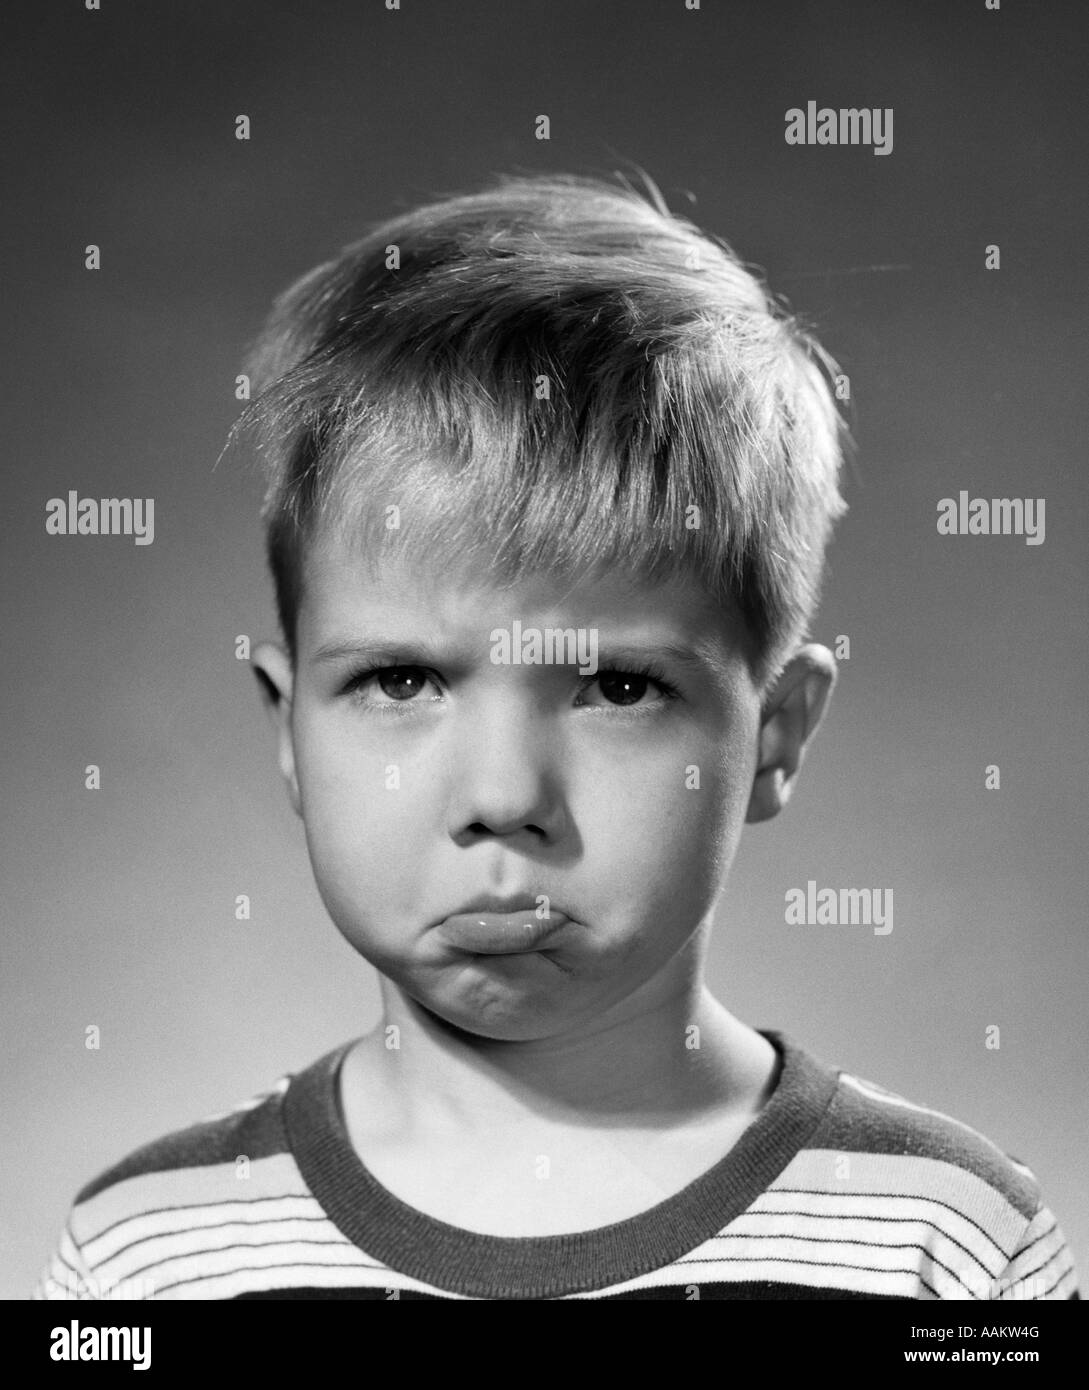 1950s PORTRAIT BLOND BOY SAD GRUMPY ANGRY POUTING FACIAL EXPRESSION LOOKING AT CAMERA Stock Photo